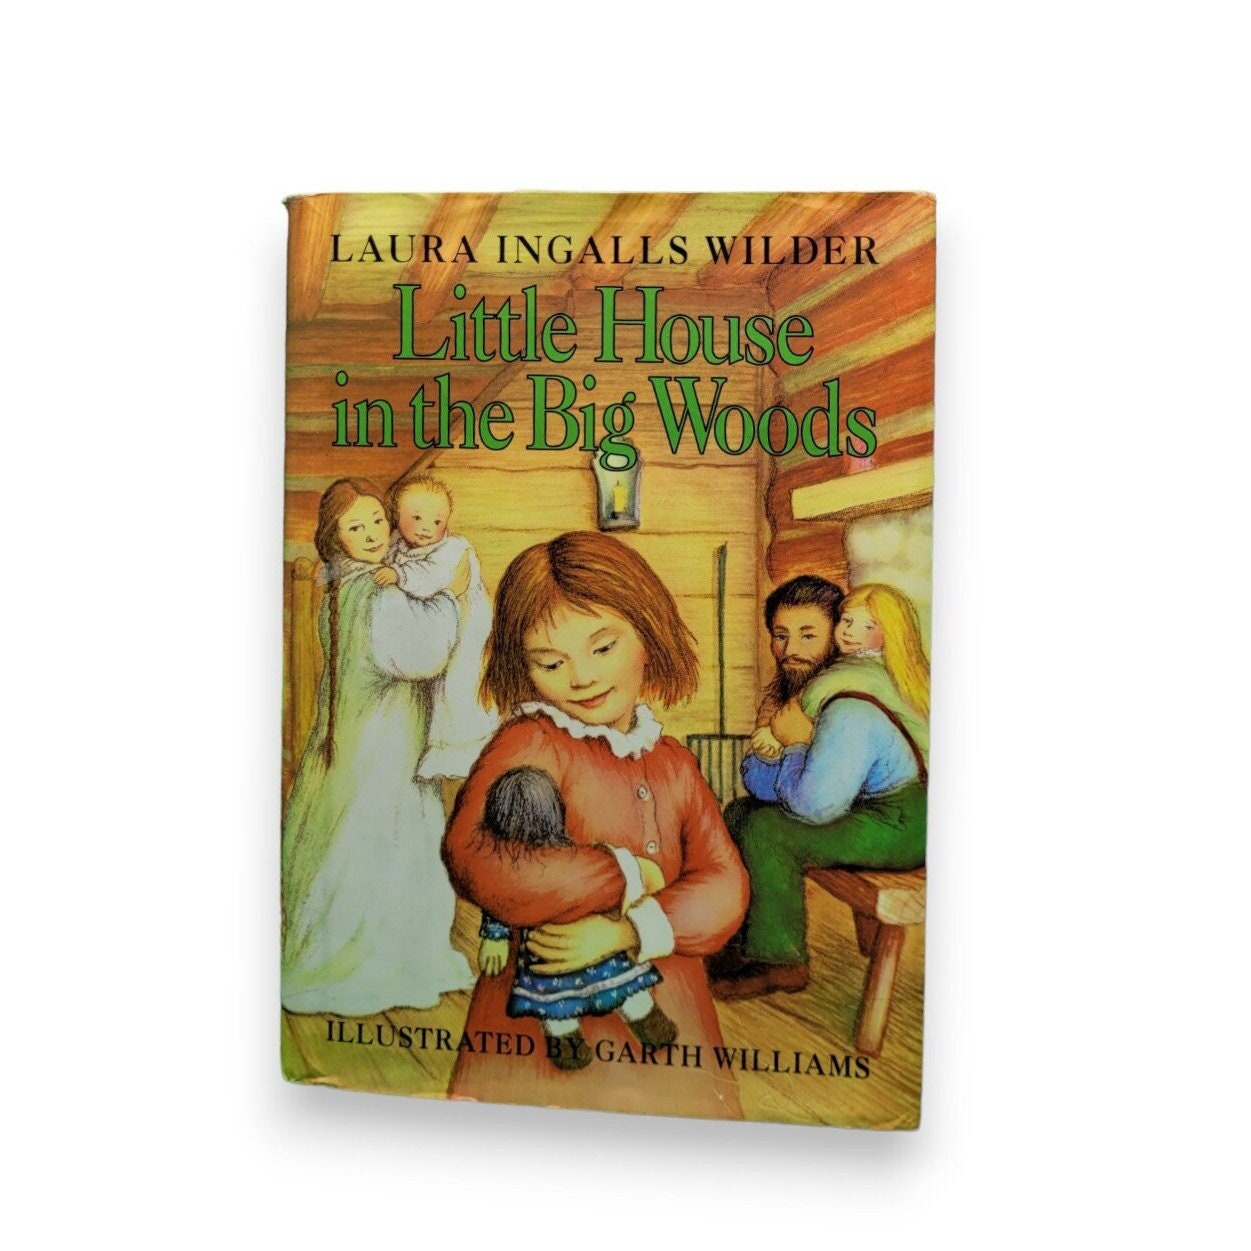 Little House in the Big Woods by Laura Ingalls Wilder 1994